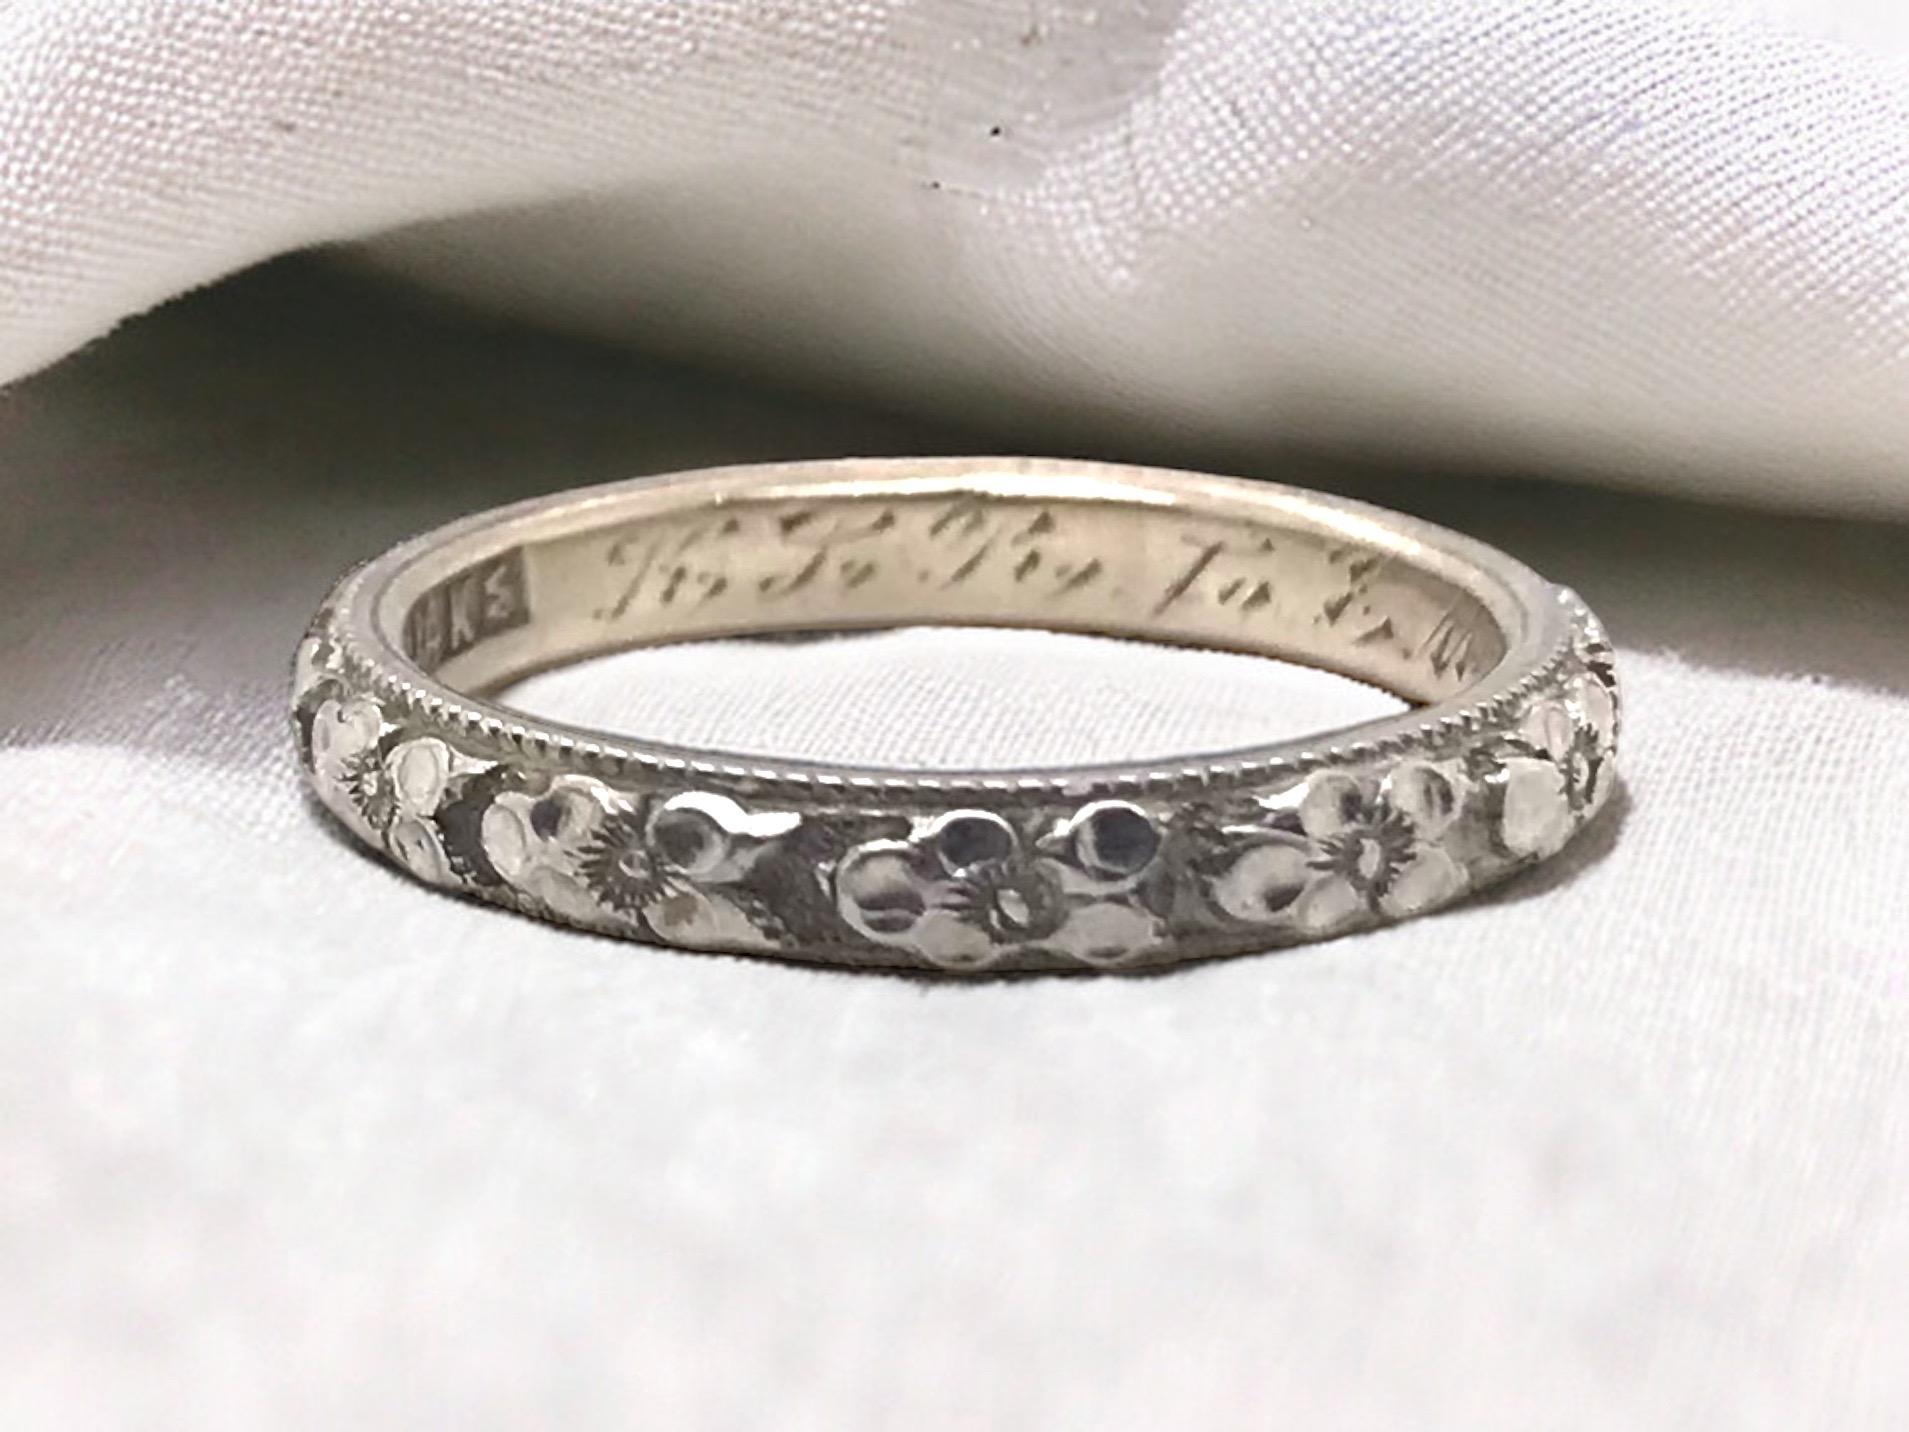 Lovely piece of vintage history!
Engraved Inside: KLR to EAG

Ring Details:
Material: 14K White Gold
Shank Width: 2.8mm 
Height: 1.8mm
Weight: 2.9 Grams
Finger Size: 5.5
Sizing Options Available 

Item: 768TMV1